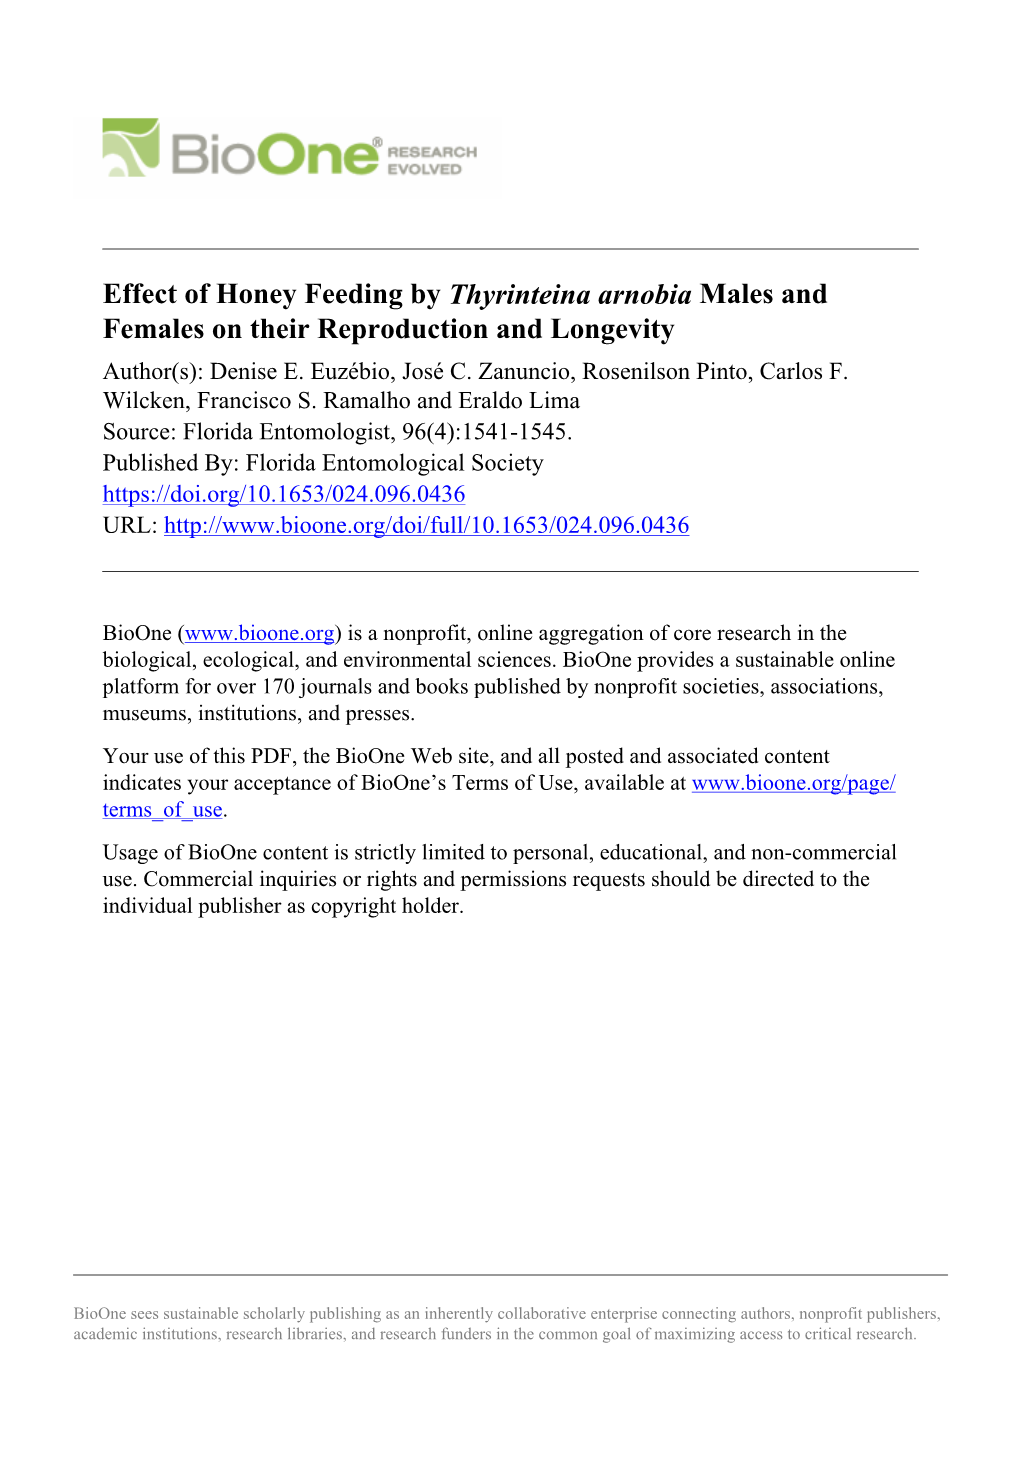 Effect of Honey Feeding by Thyrinteina Arnobia Males and Females on Their Reproduction and Longevity Author(S): Denise E